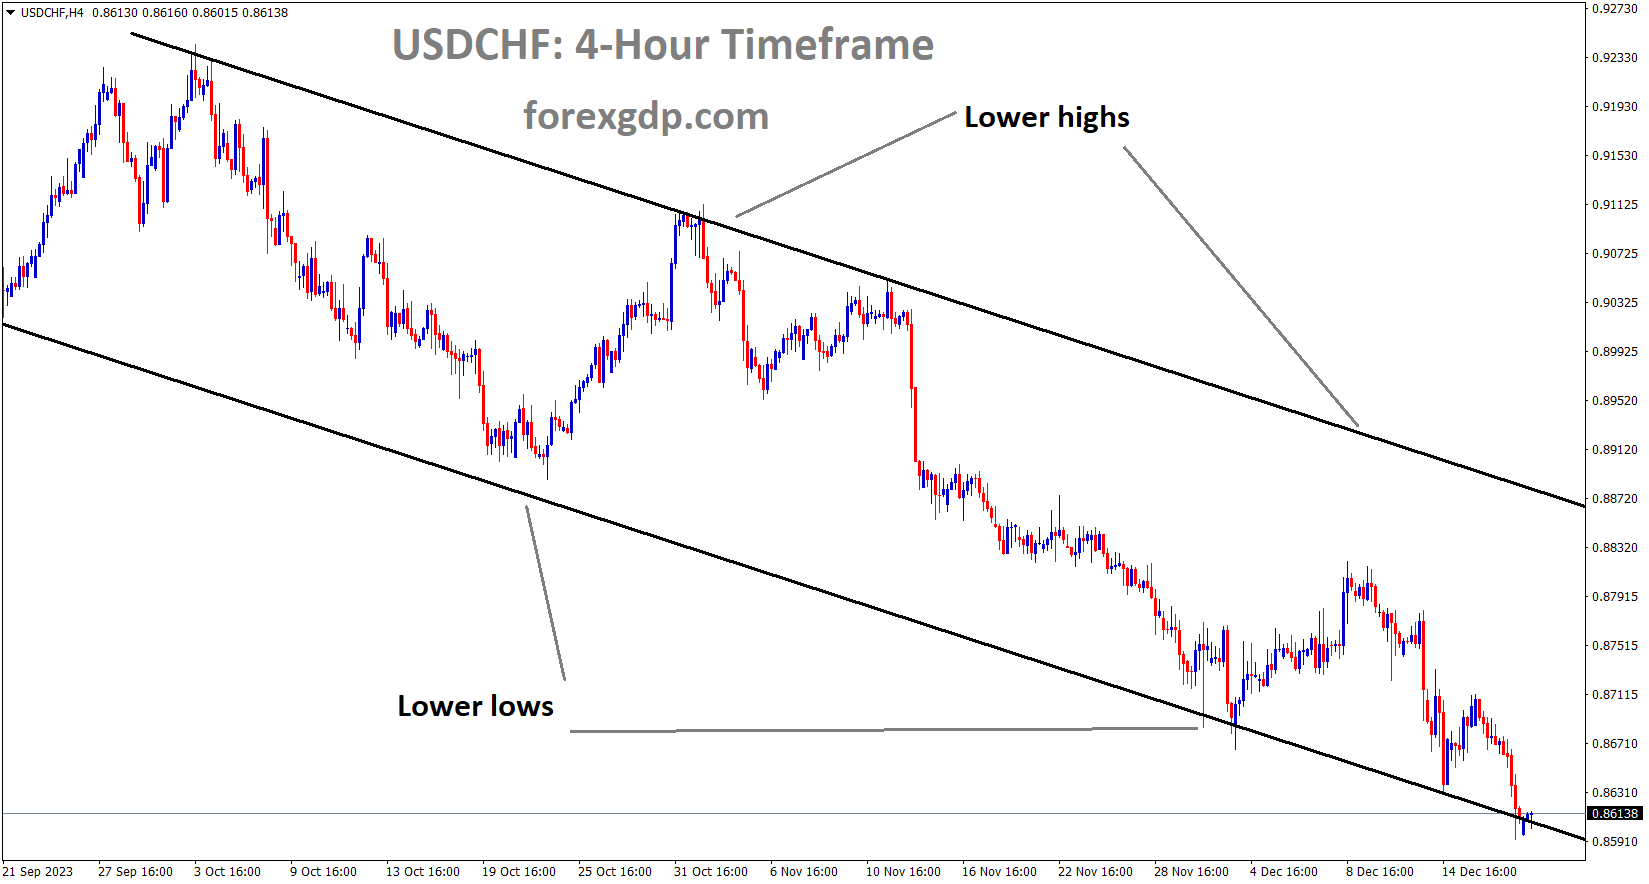 USDCHF is moving in the Descending channel and the market has reached the lower low area of the channel